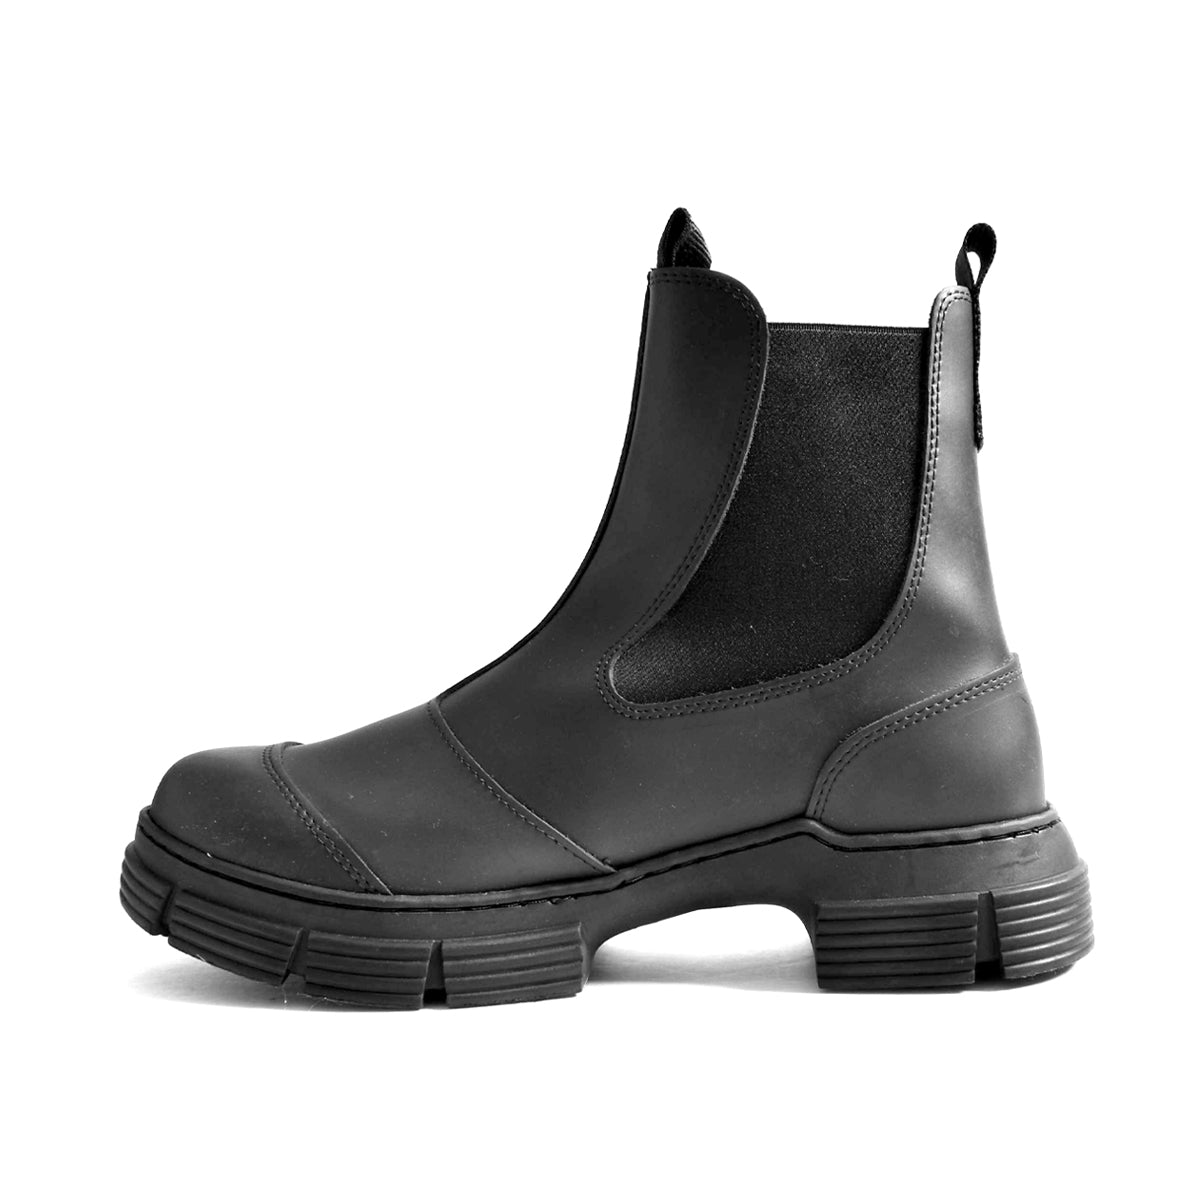 AMAILGANNI Recycled Rubber City Boot